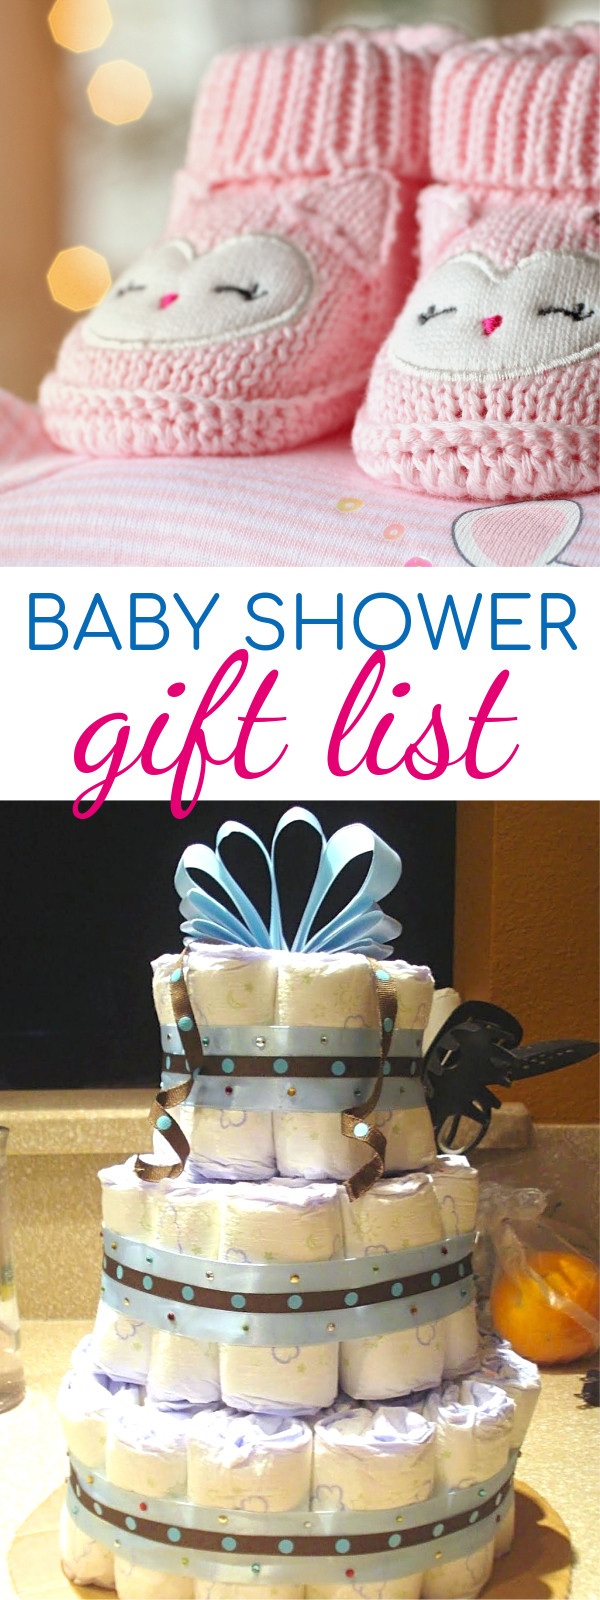 Baby Shower Gift List Ideas
 Baby Shower Gift List 5 Creative and Unique Baby Shower